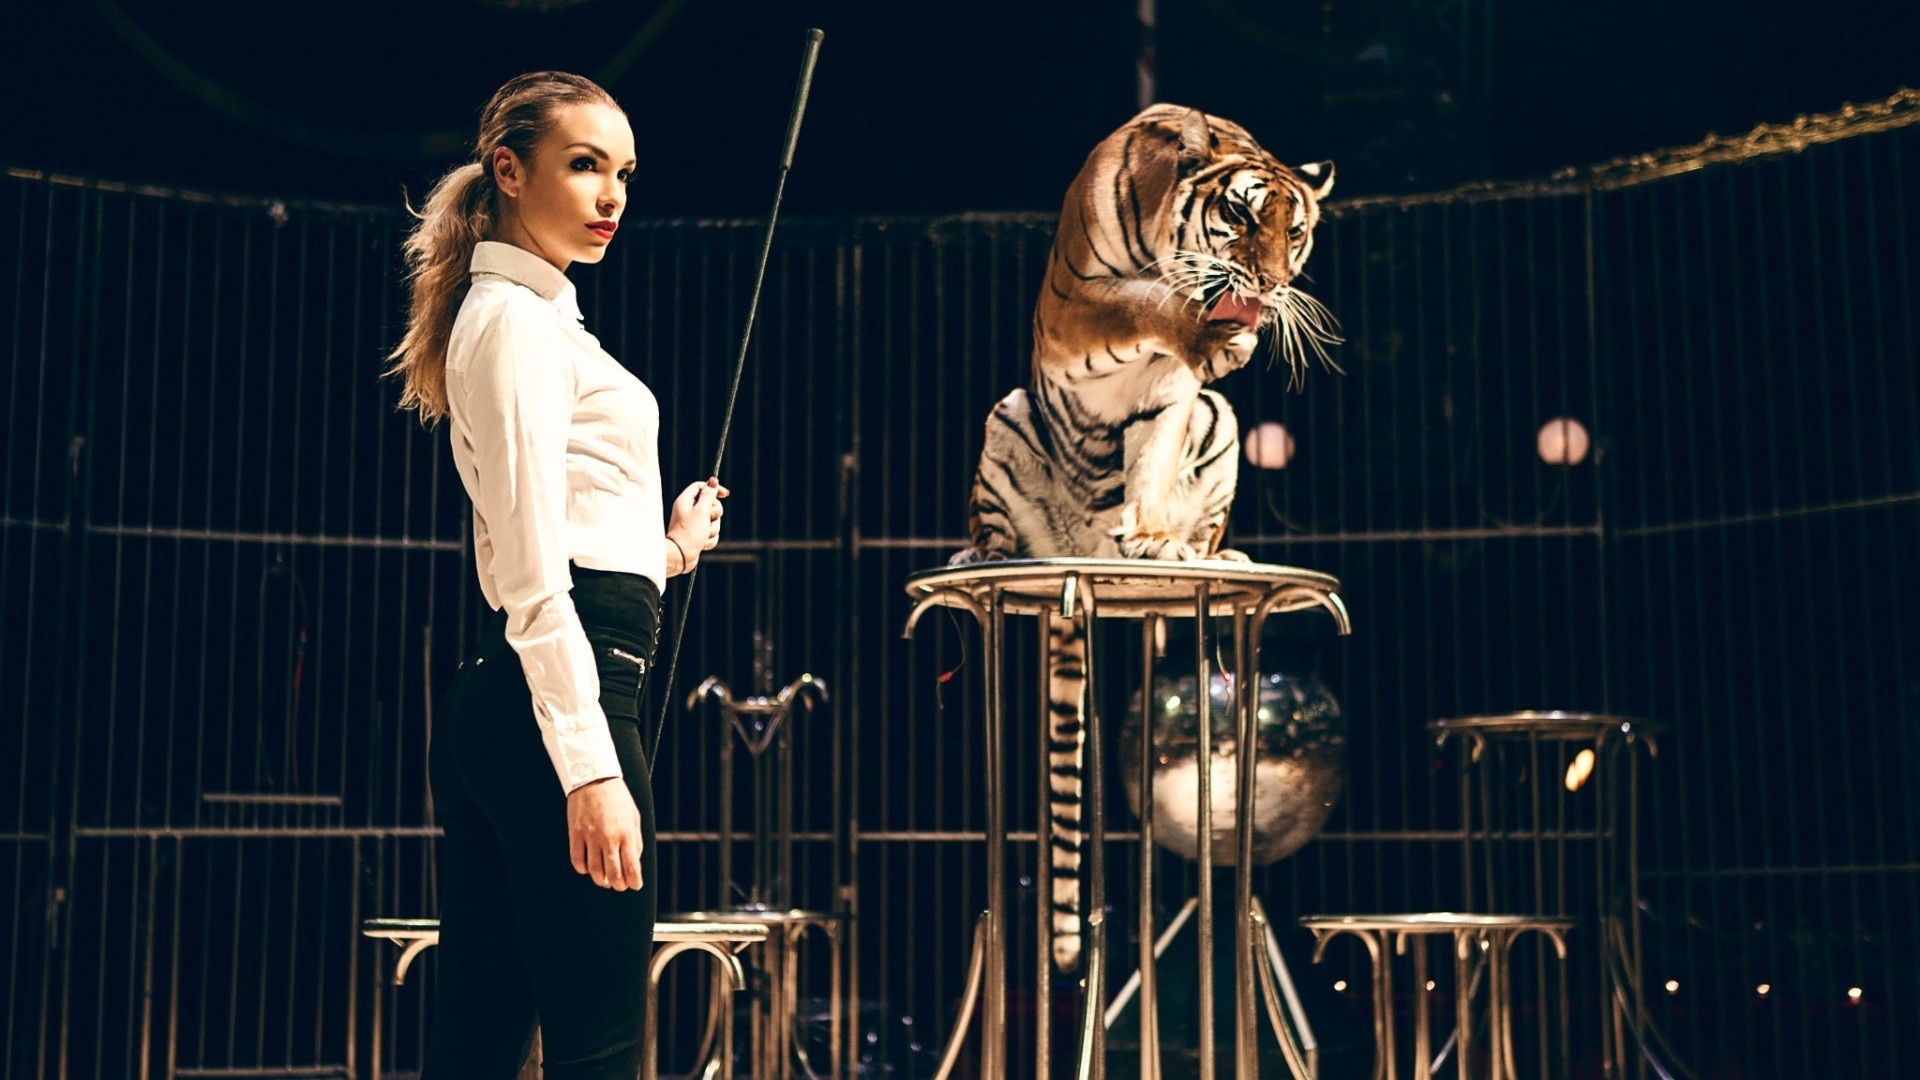 women, Model, Blonde, Long Hair, Circus, Animals, Tiger, Cages, Tight Clothing, Shirt, Whips, Training, Danger, Ponytail, Looking Away, Red Lipstick, Wild Cat Wallpaper